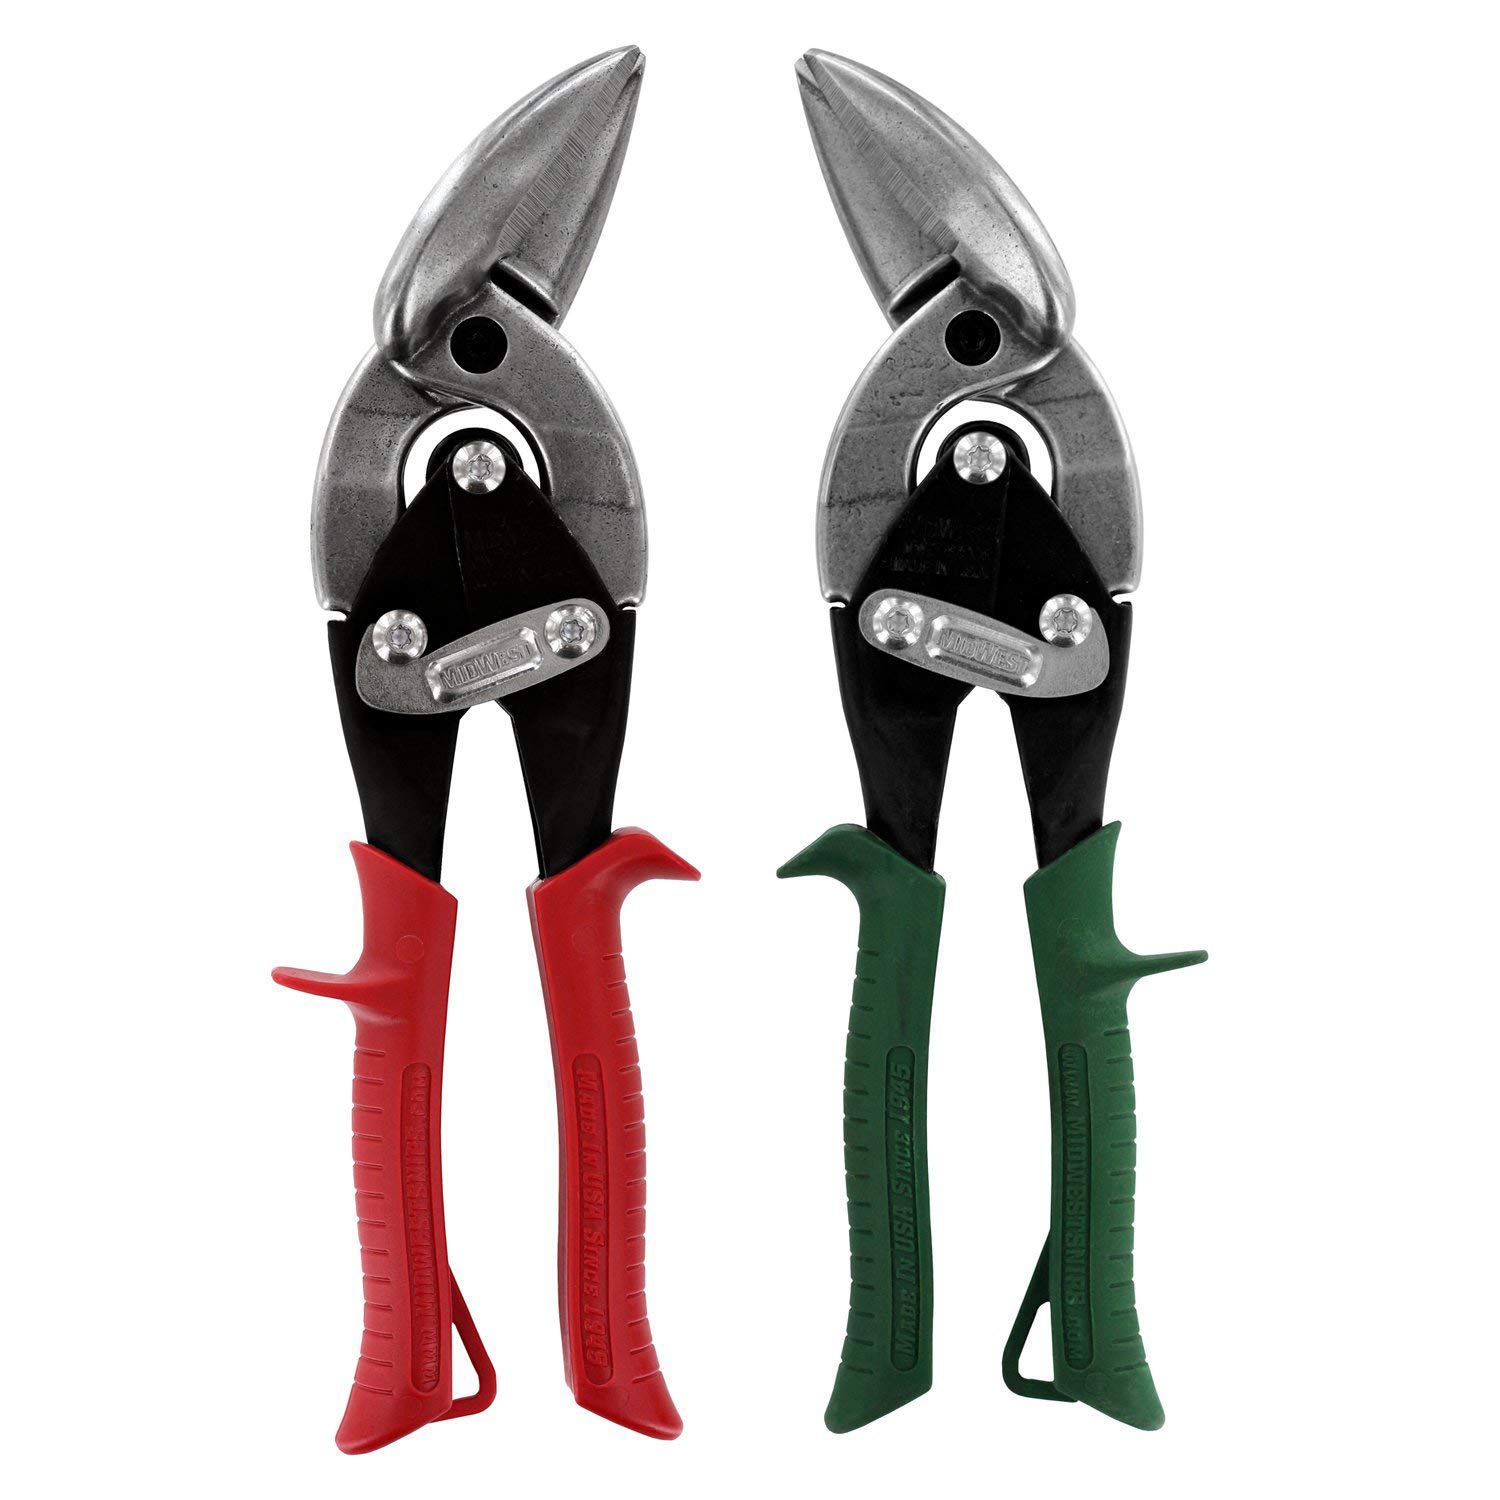 MIDWEST Aviation Snip - Left and Right Cut Offset Stainless Steel Cutting Shears with Forged Blade KUSHN-Power Comfort Gri